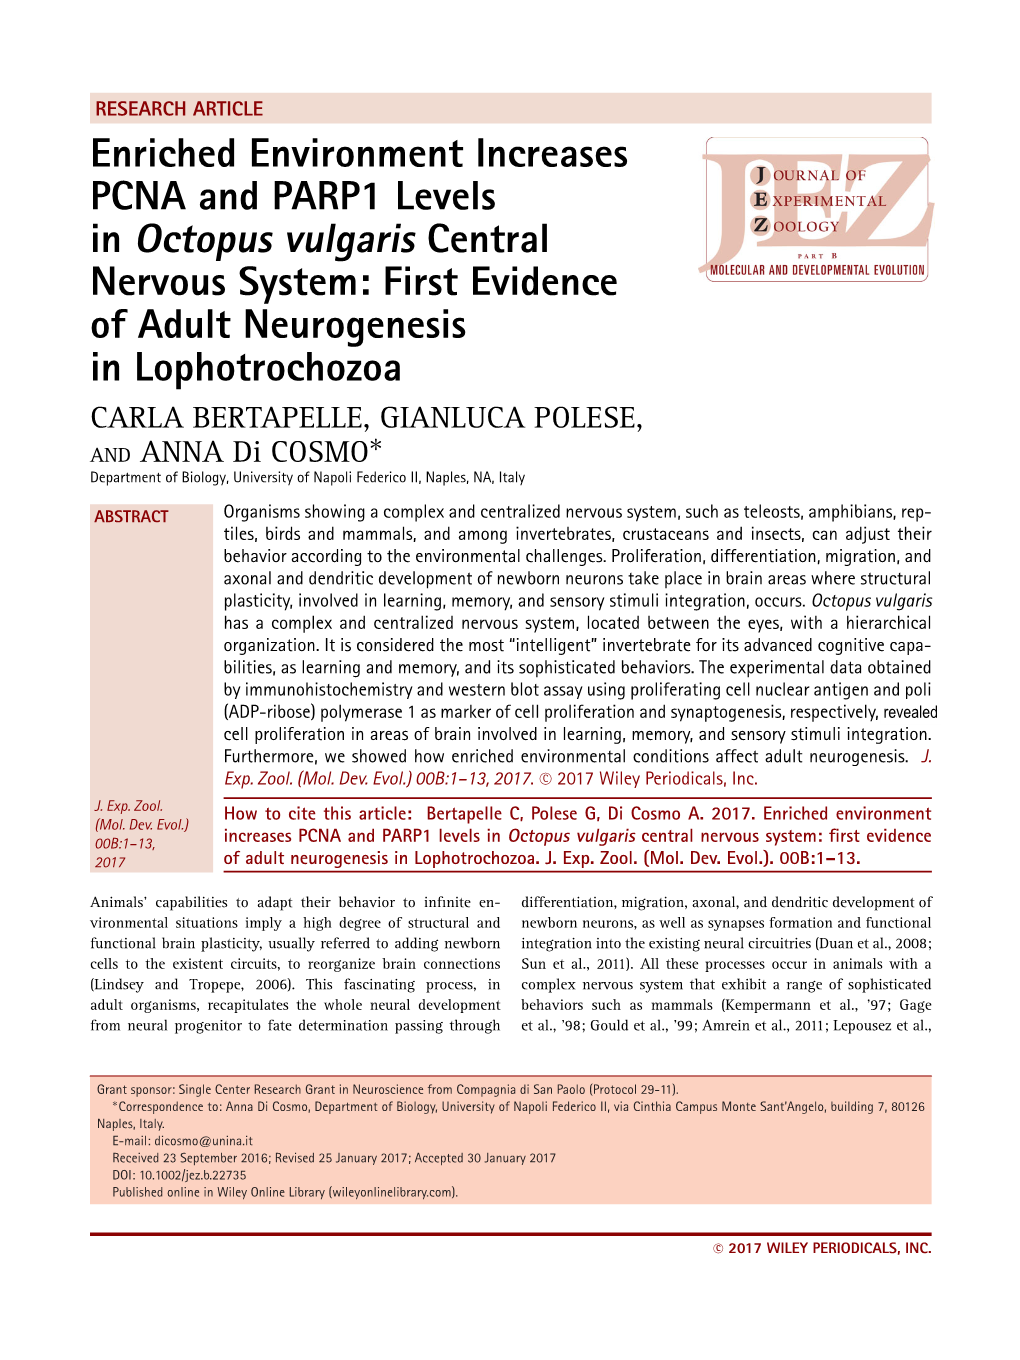 Enriched Environment Increases PCNA and PARP1 Levels in Octopus Vulgaris Central Nervous System